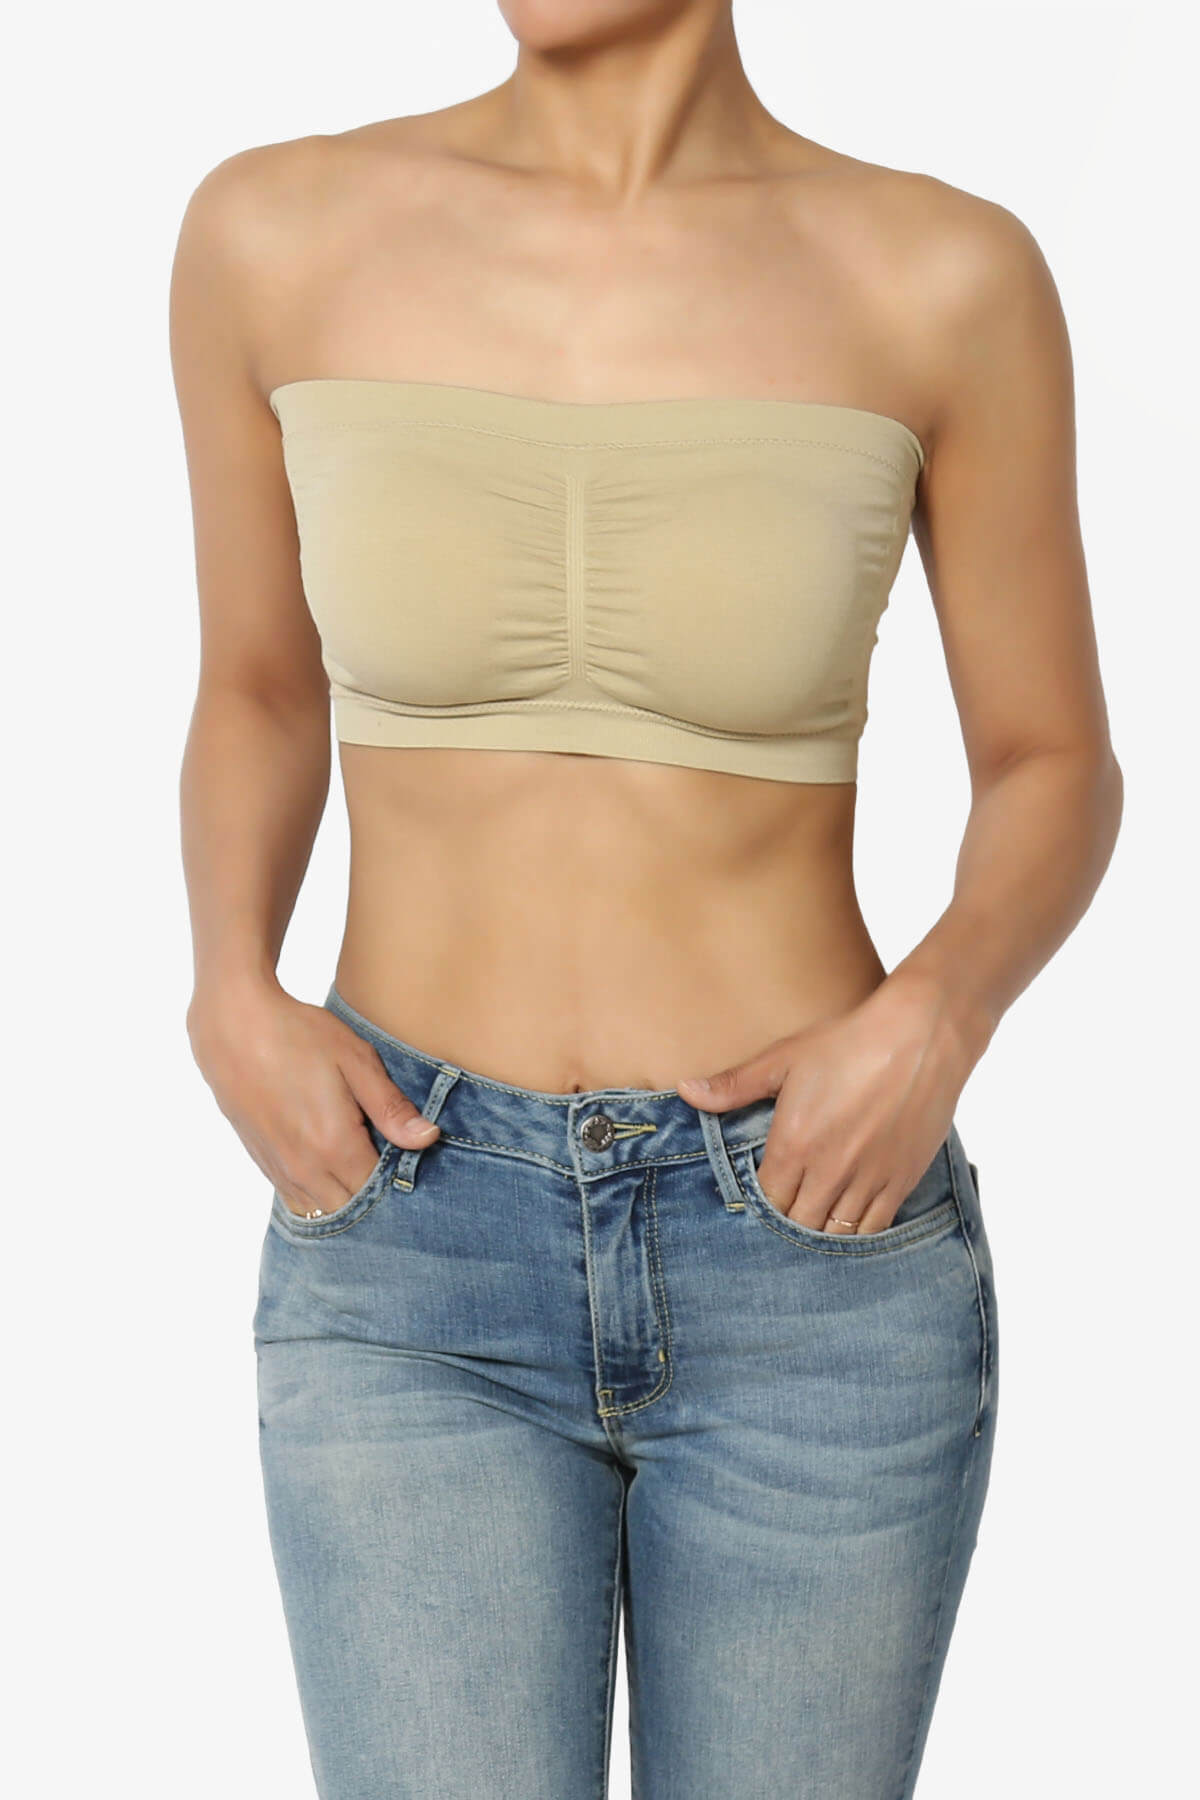 Womens Bandeau Tube Tops Seamless Built In Bra Padded Removable